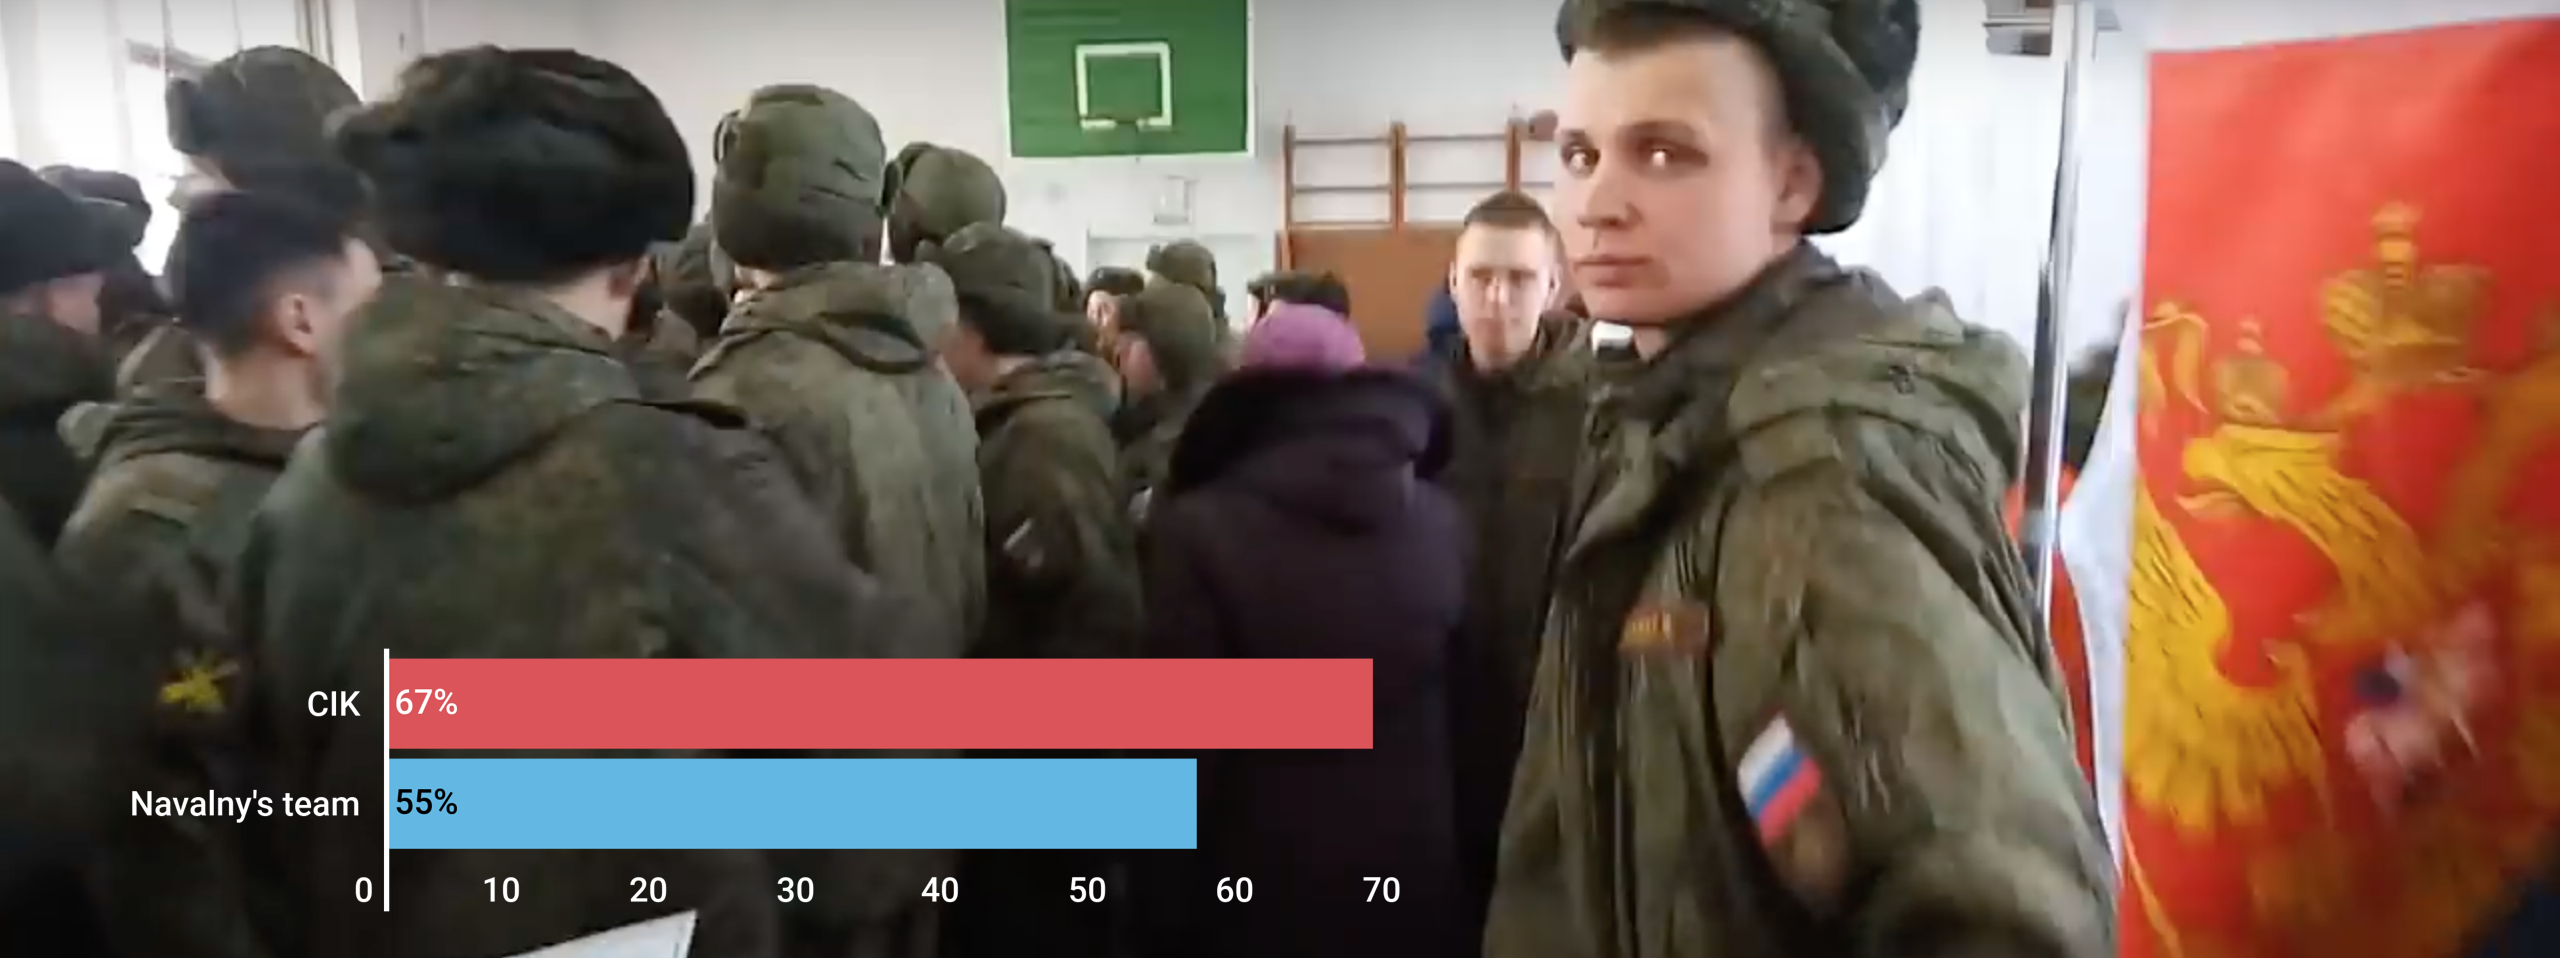 #ElectionWatch: Distorted Data for Turnout in Russia